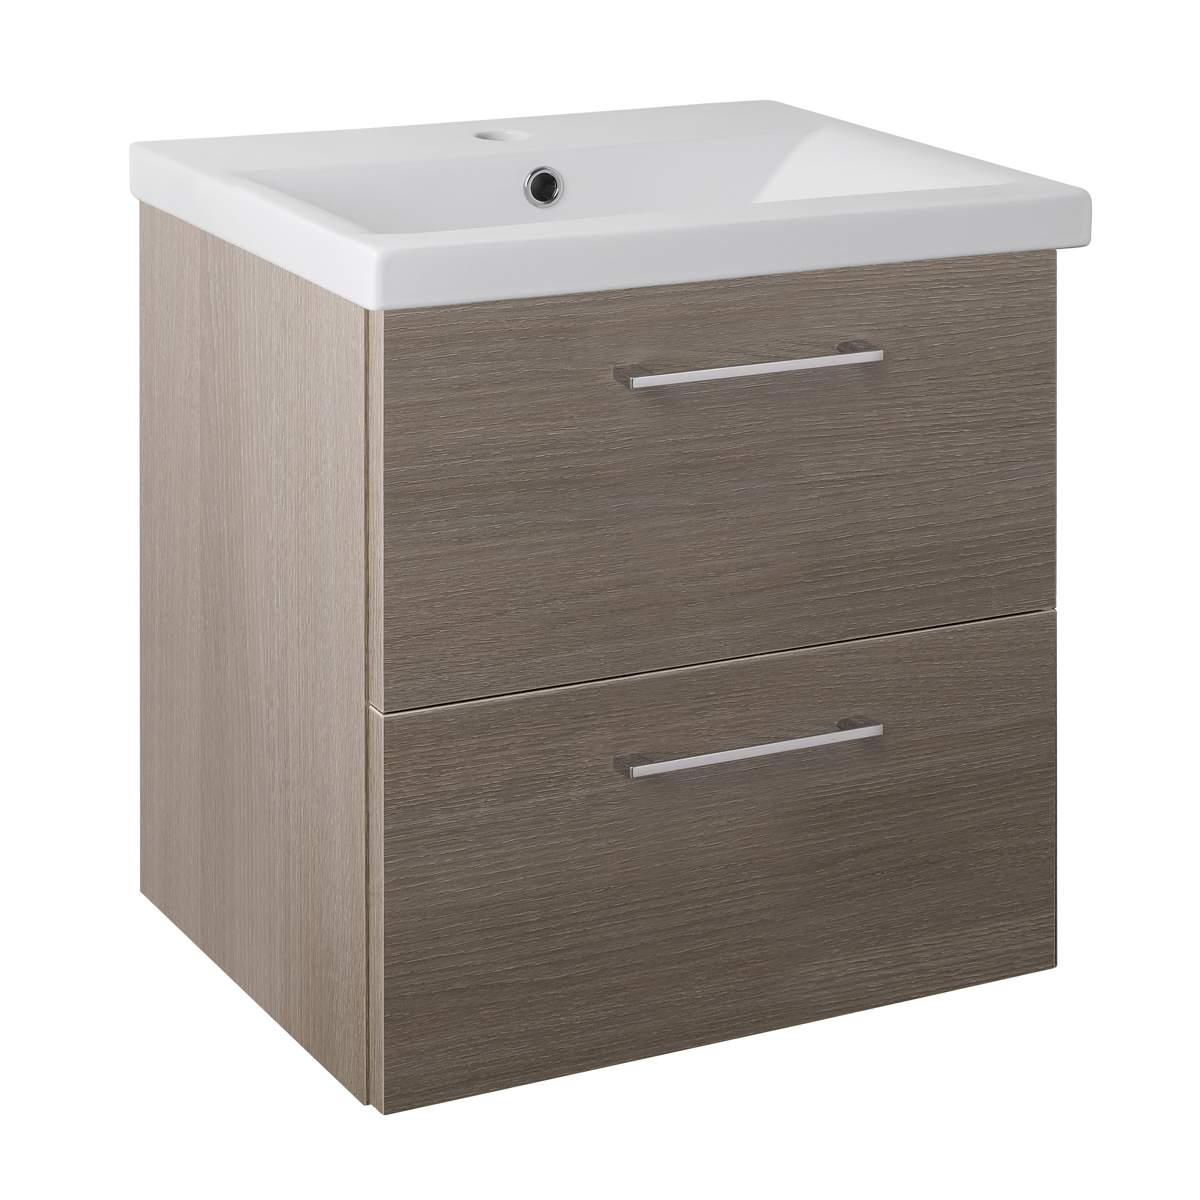 JTP Pace Units 500mm Wall Mounted Unit with Drawers and Basin in Grey